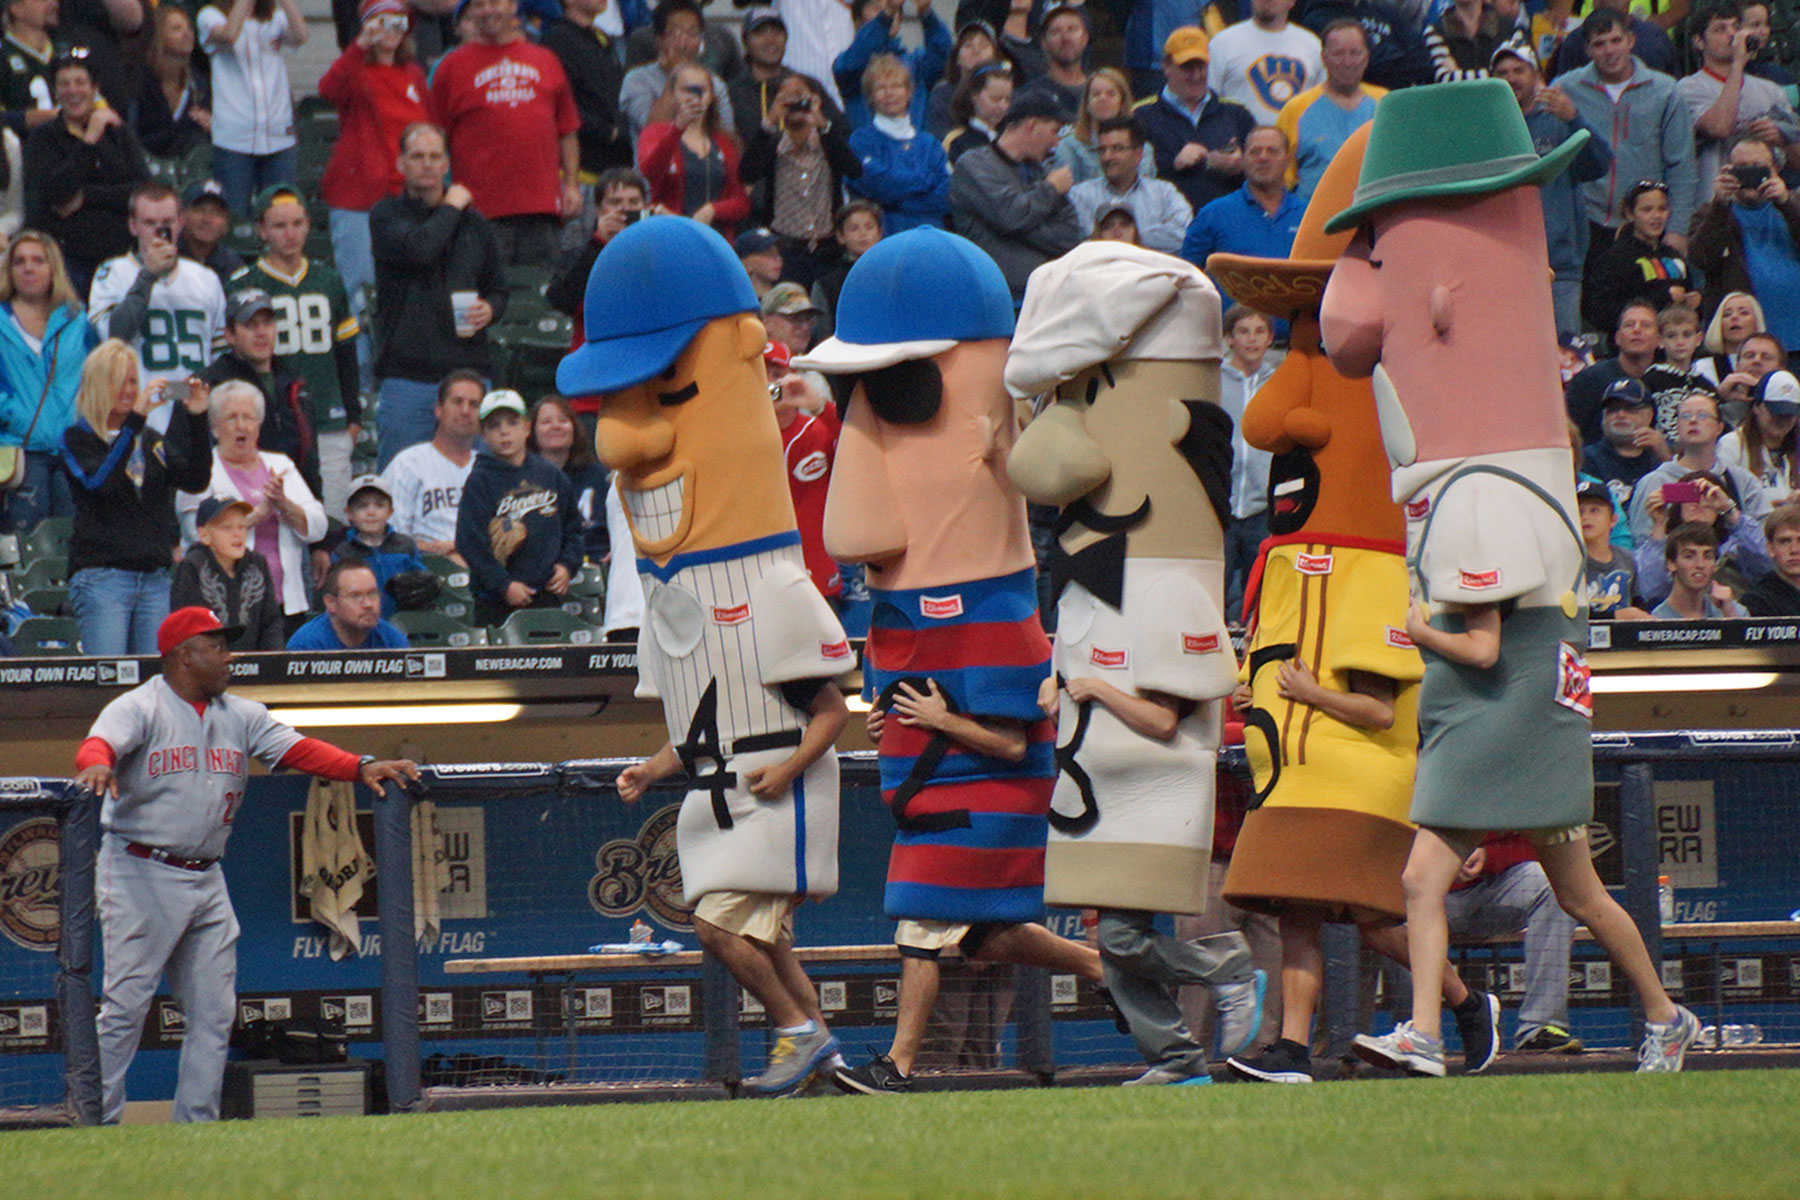 Brewers cut Klement's from racing sausage tradition after 25 year